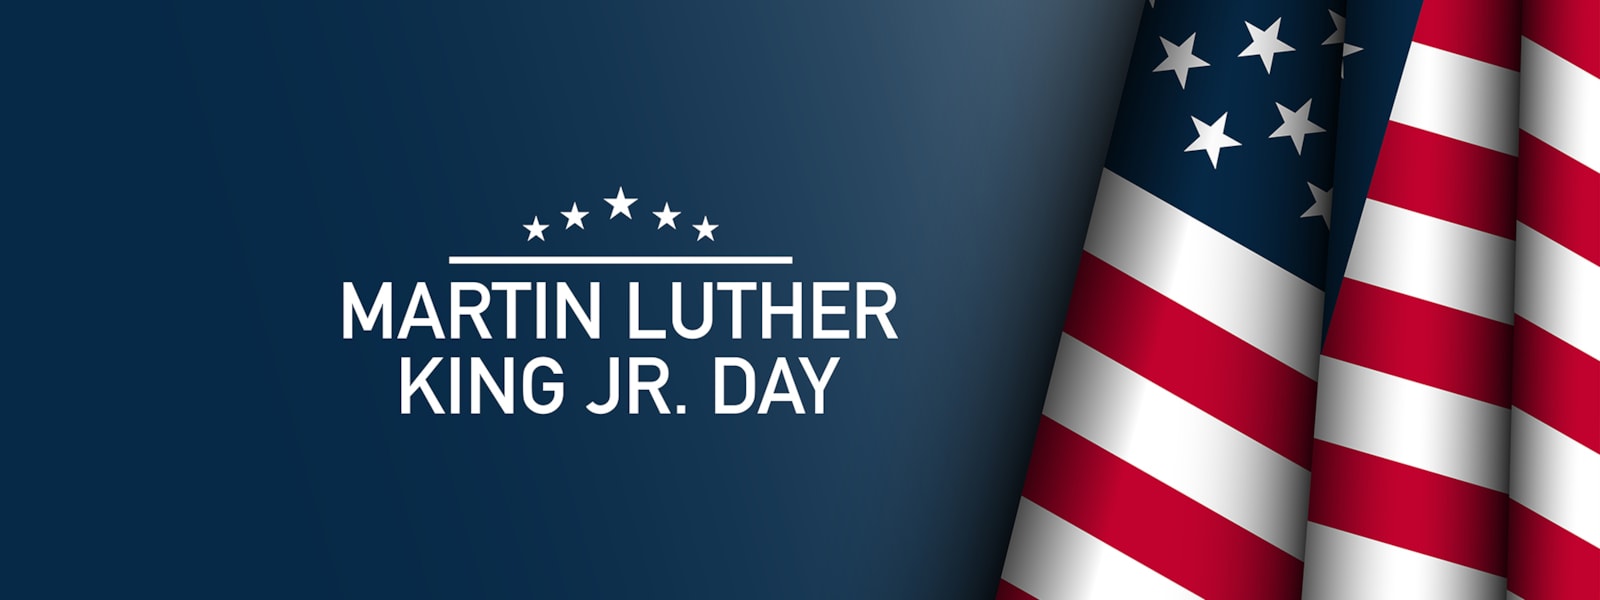 Martin Luther King Jr. Day and Flag 